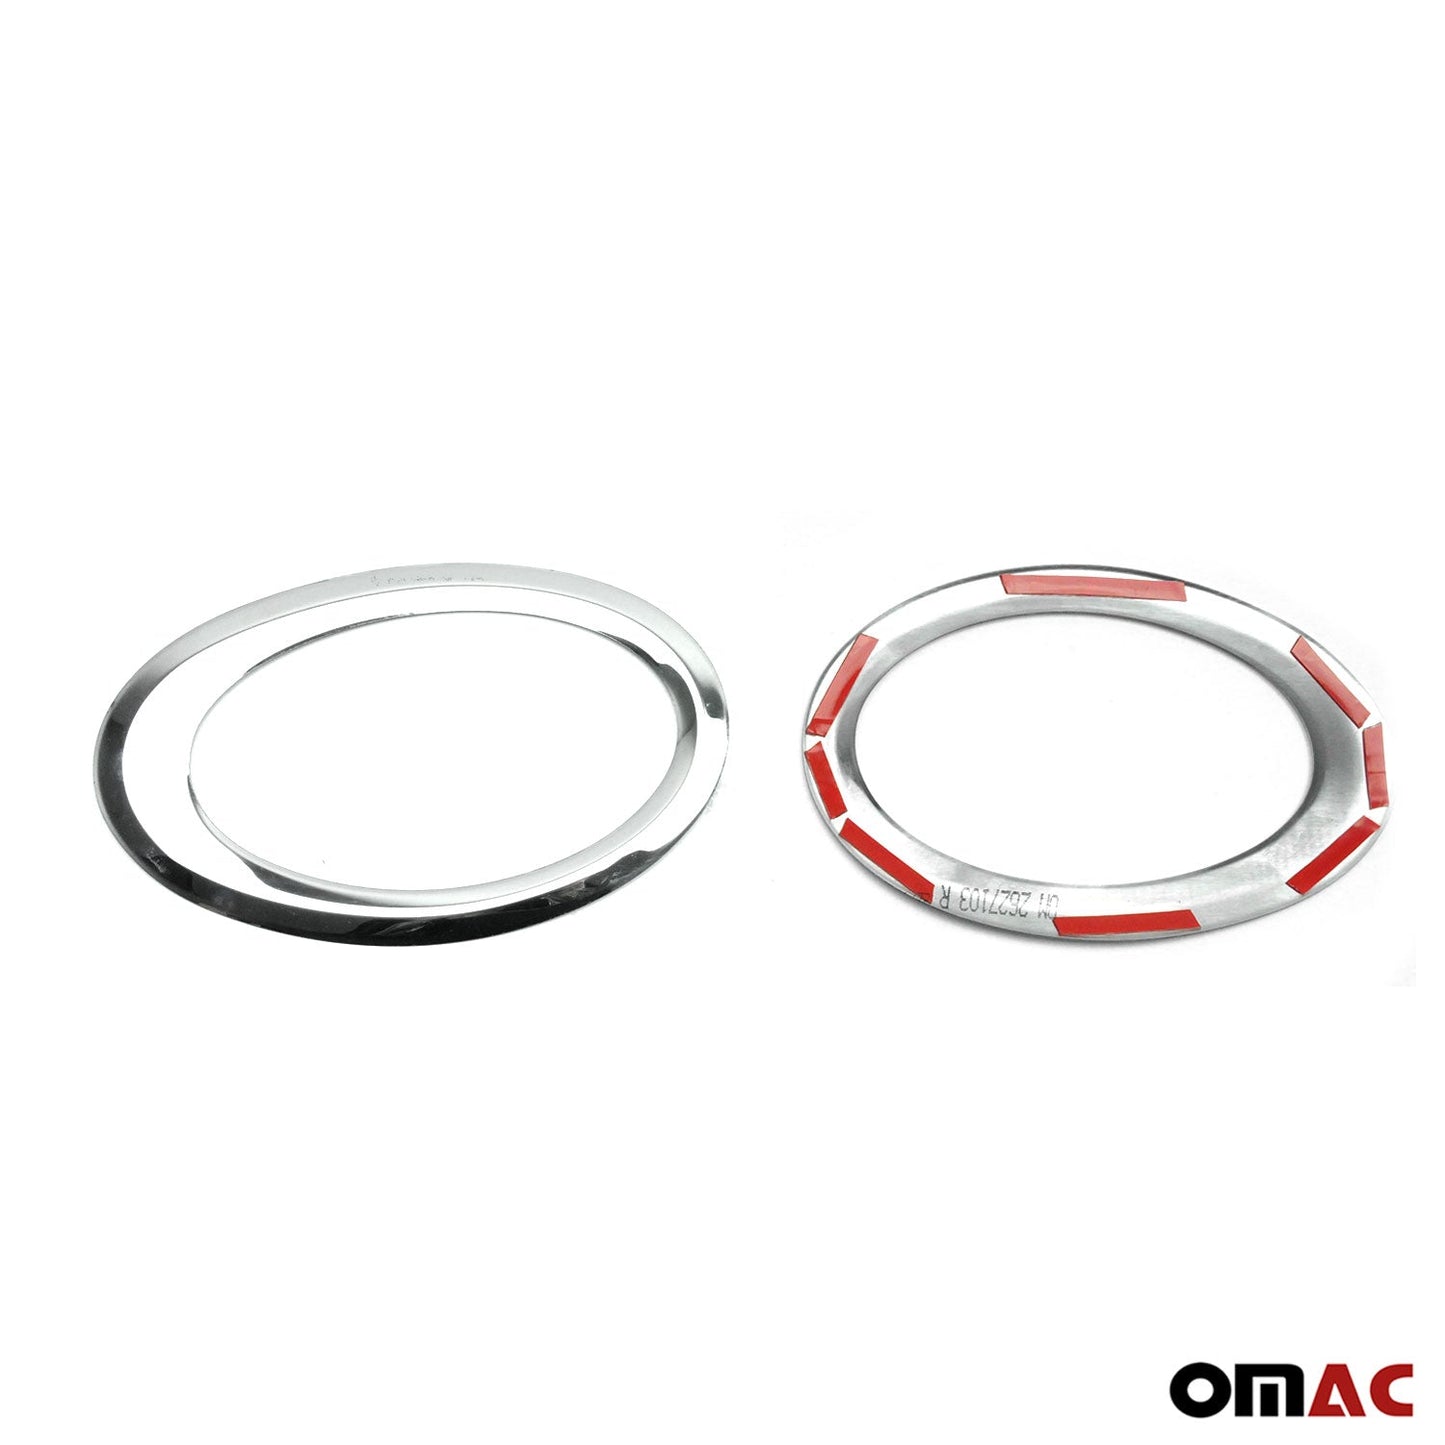 OMAC Fog Light Lamp Bezel Cover for Ford Transit Connect 2014-2019 Steel Silver 2 Pcs 2627103